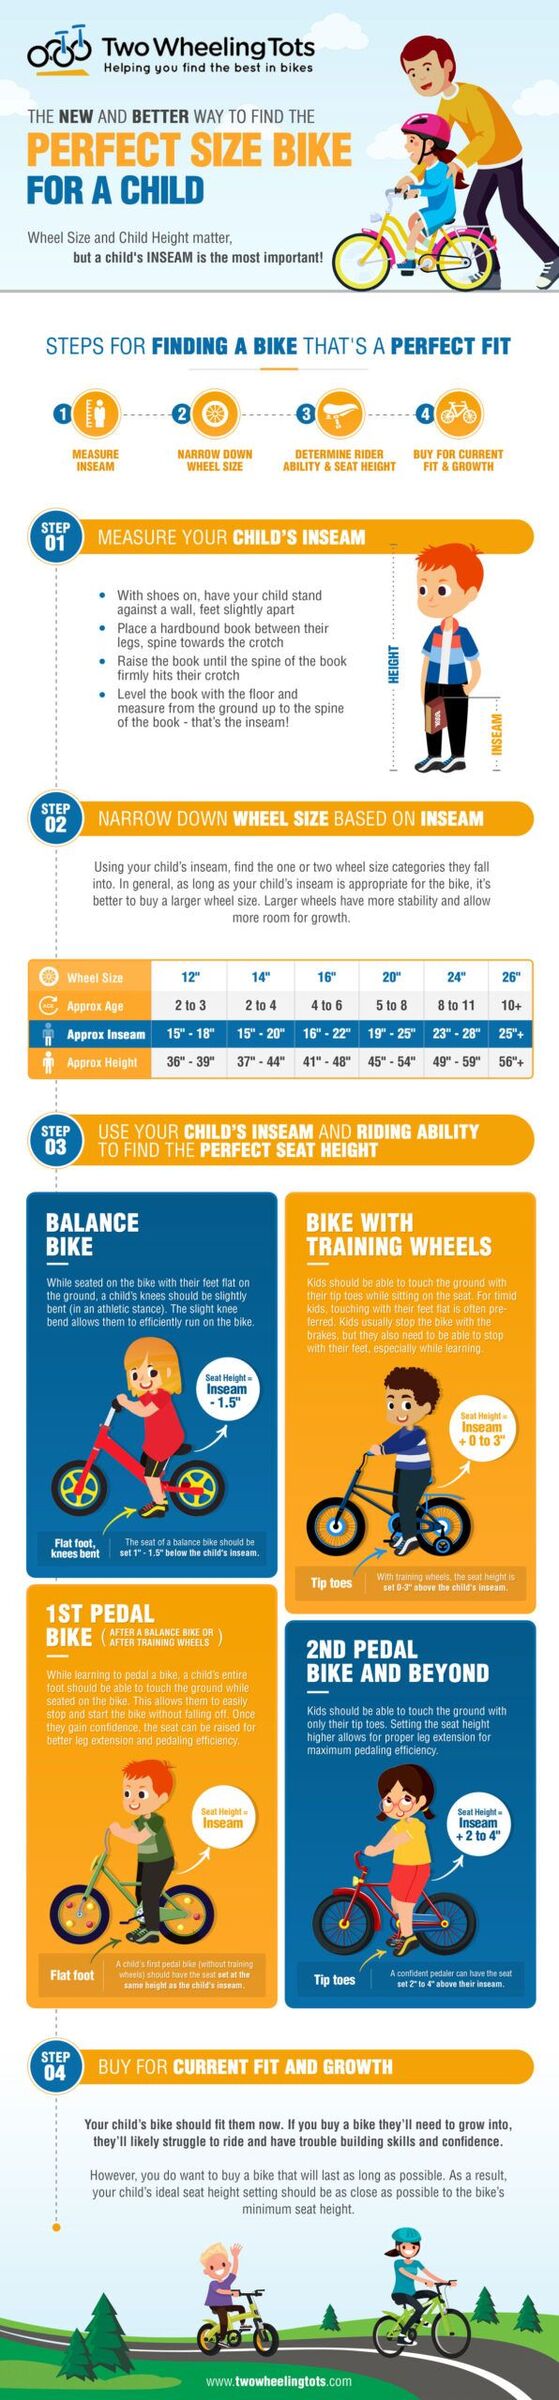 Kids Bike Sizes Guide A New Trick To Finding The Best Fit